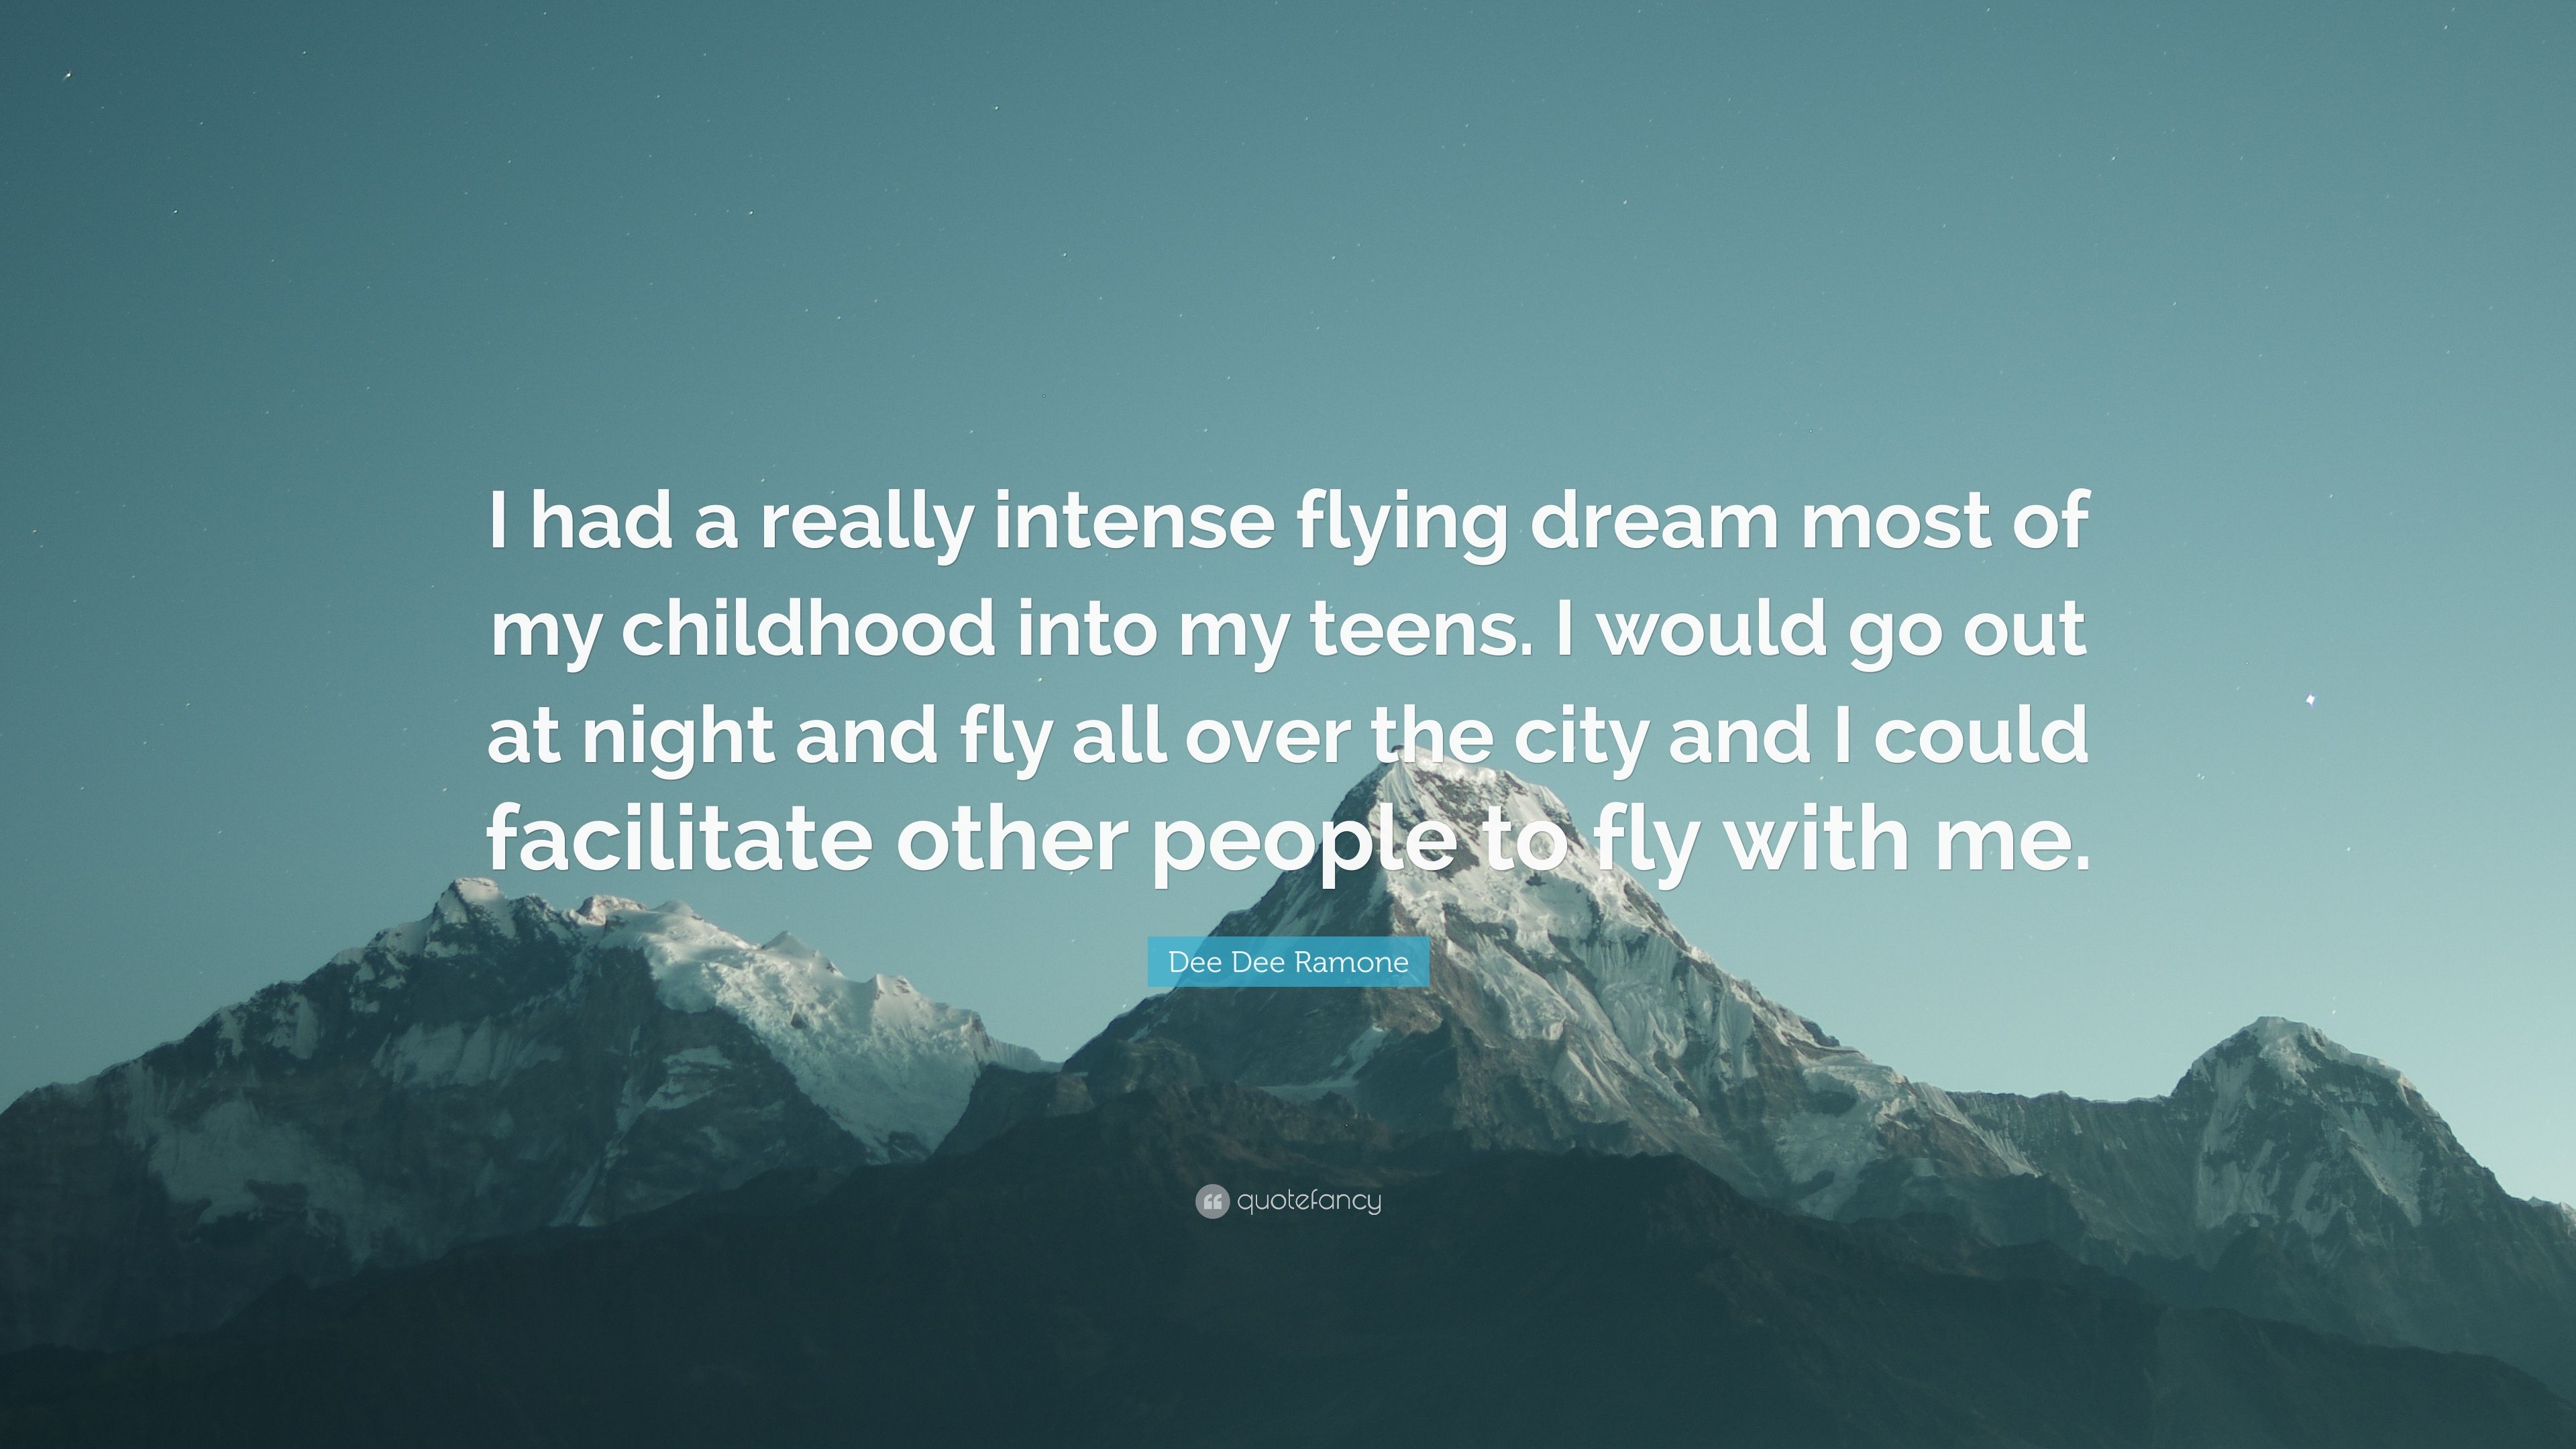 Dee Dee Ramone Quote: “I had a really intense flying dream most of ...